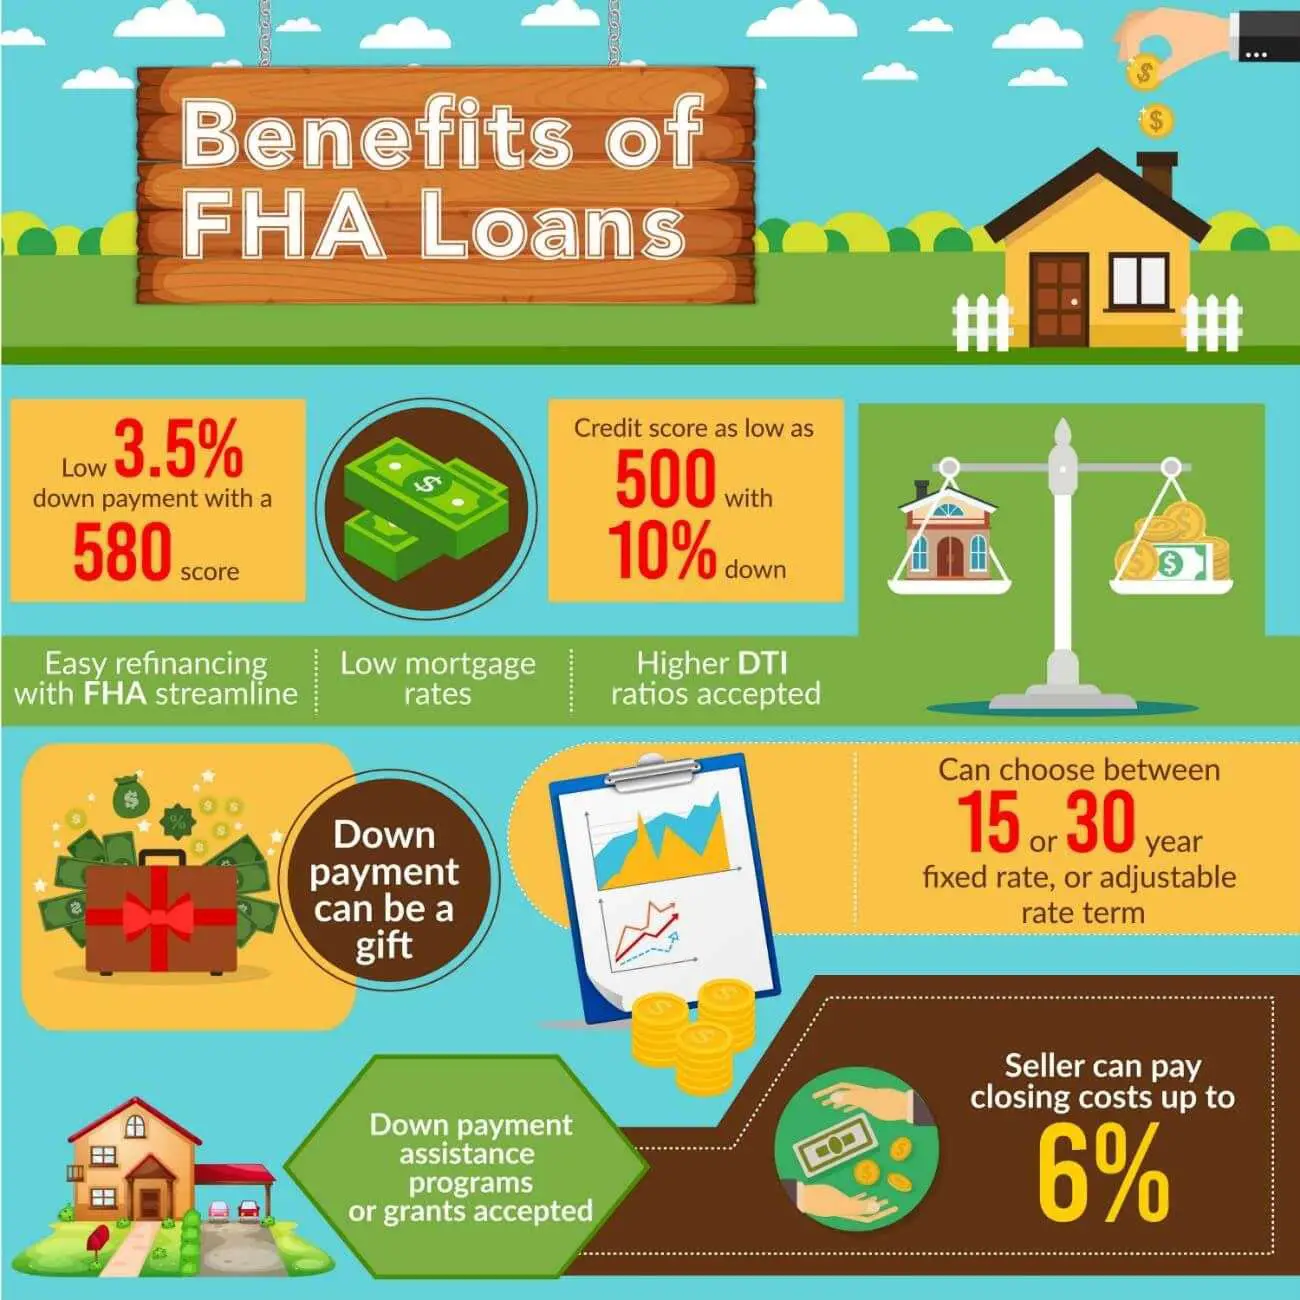 How To Get A Fha Loan In Michigan